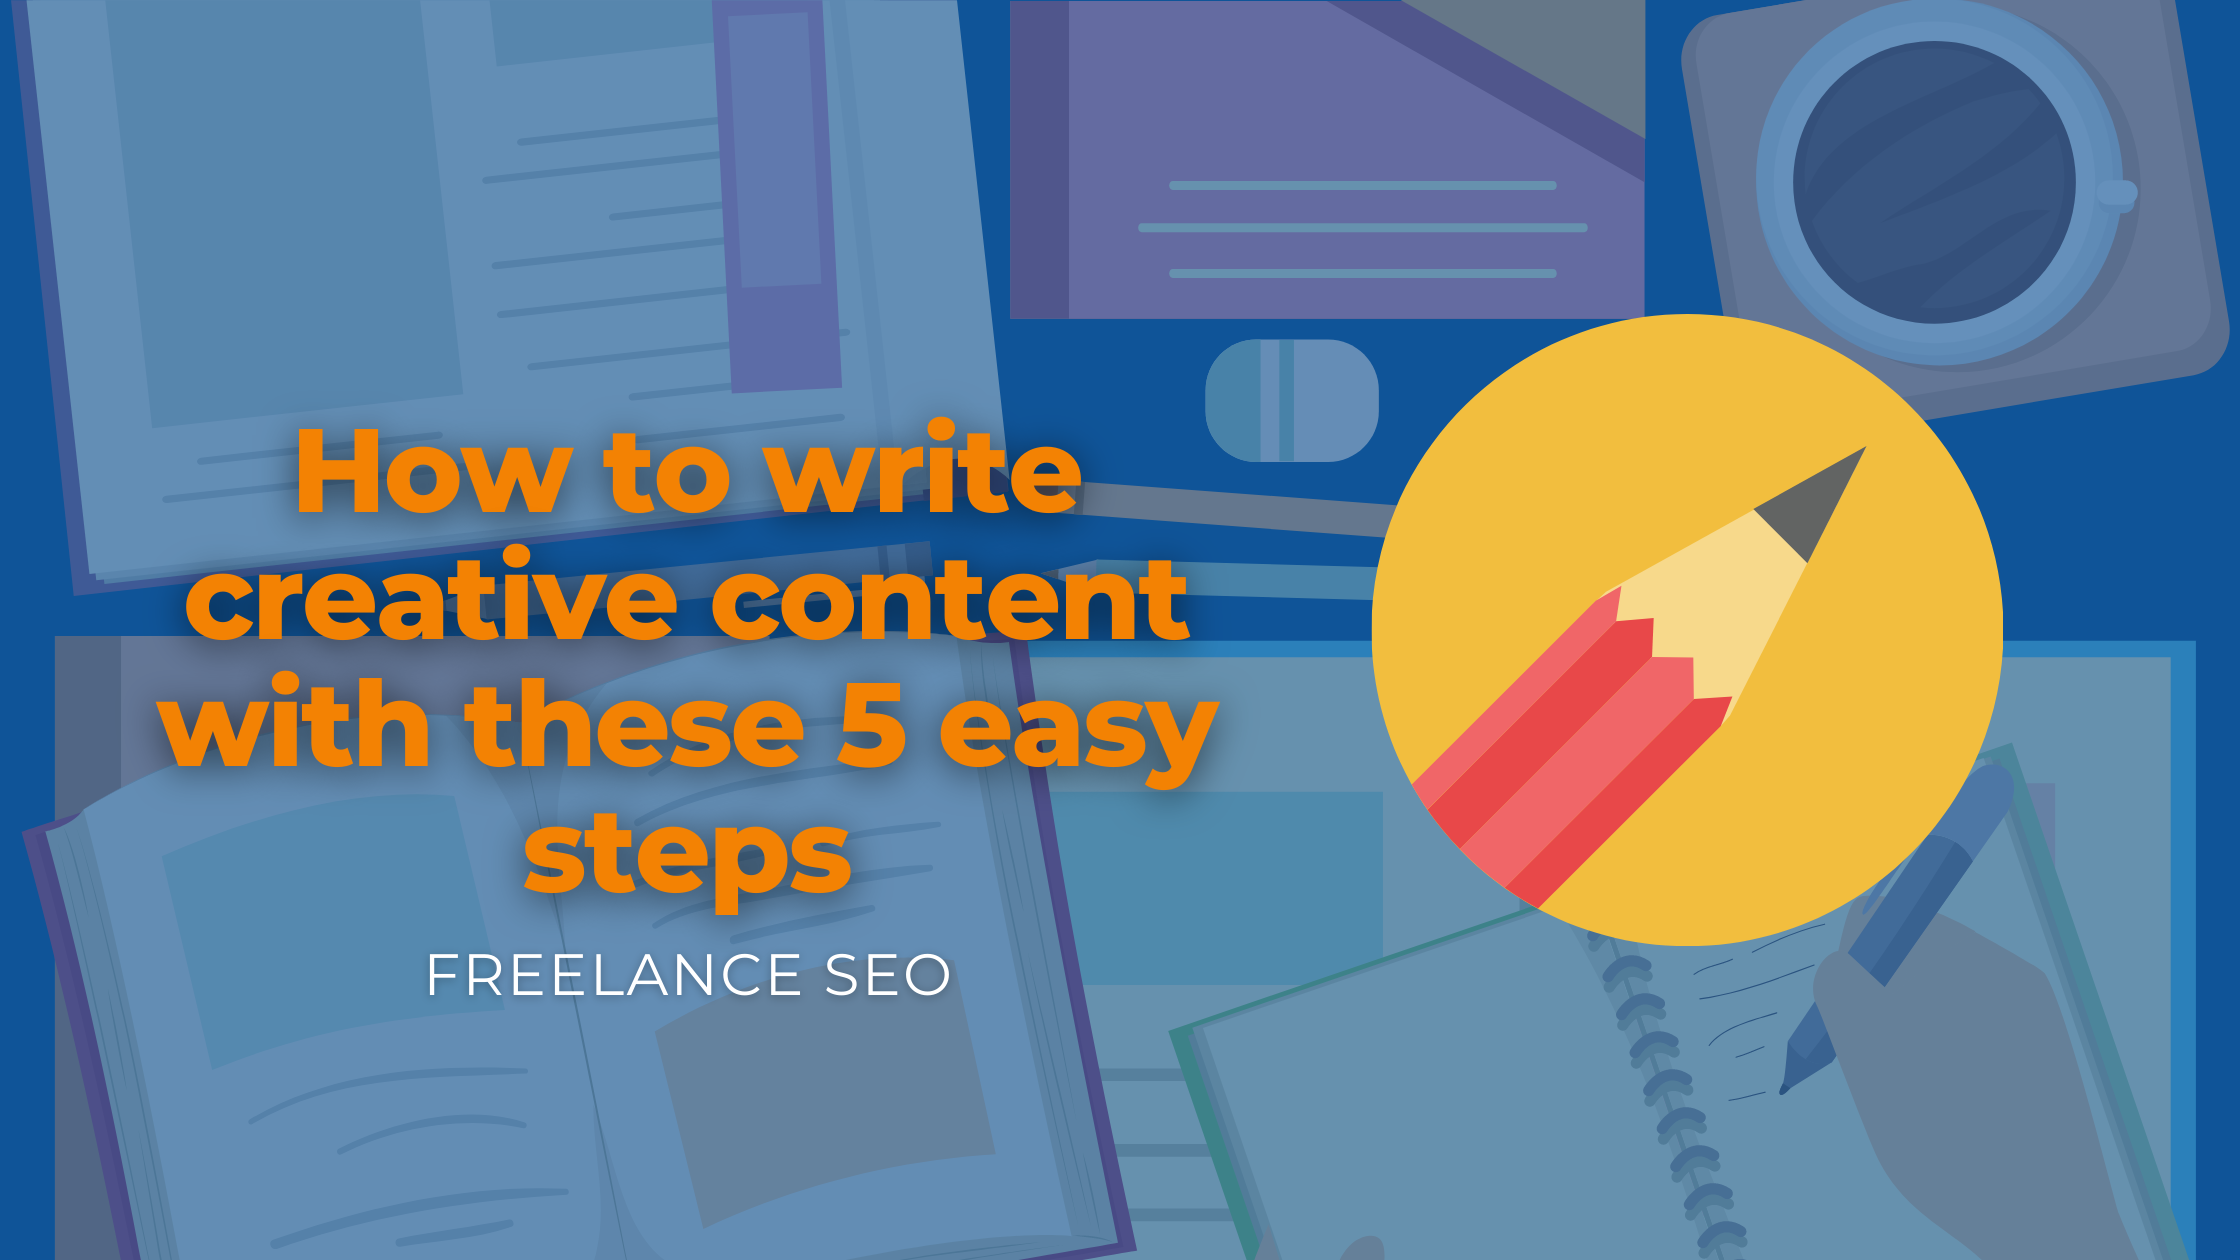 How to write creative content with these 5 easy steps